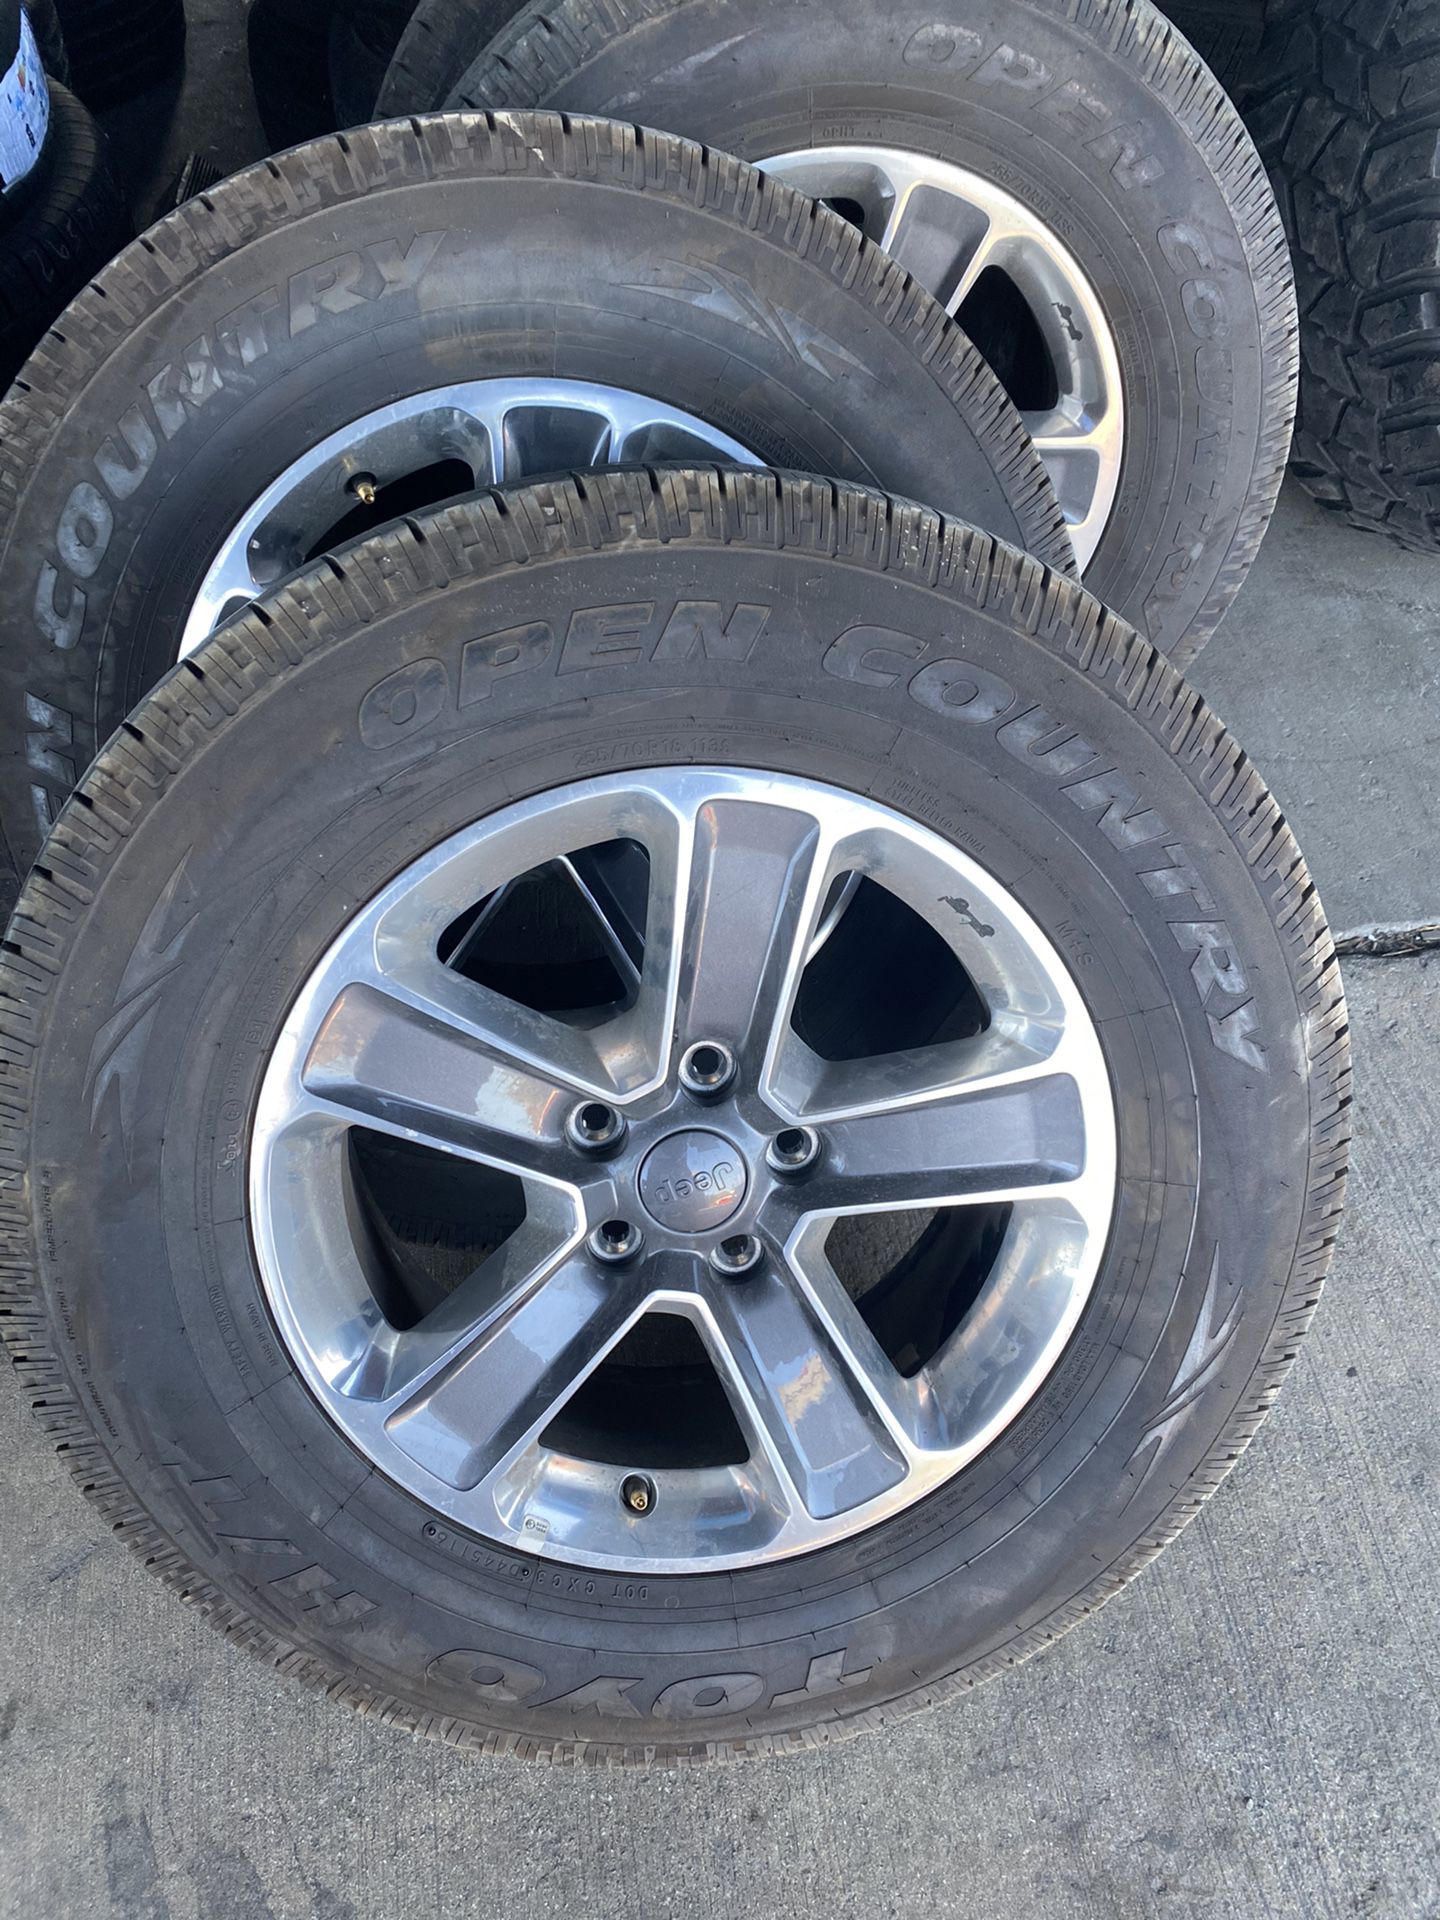 New factory take off Jeep wheels